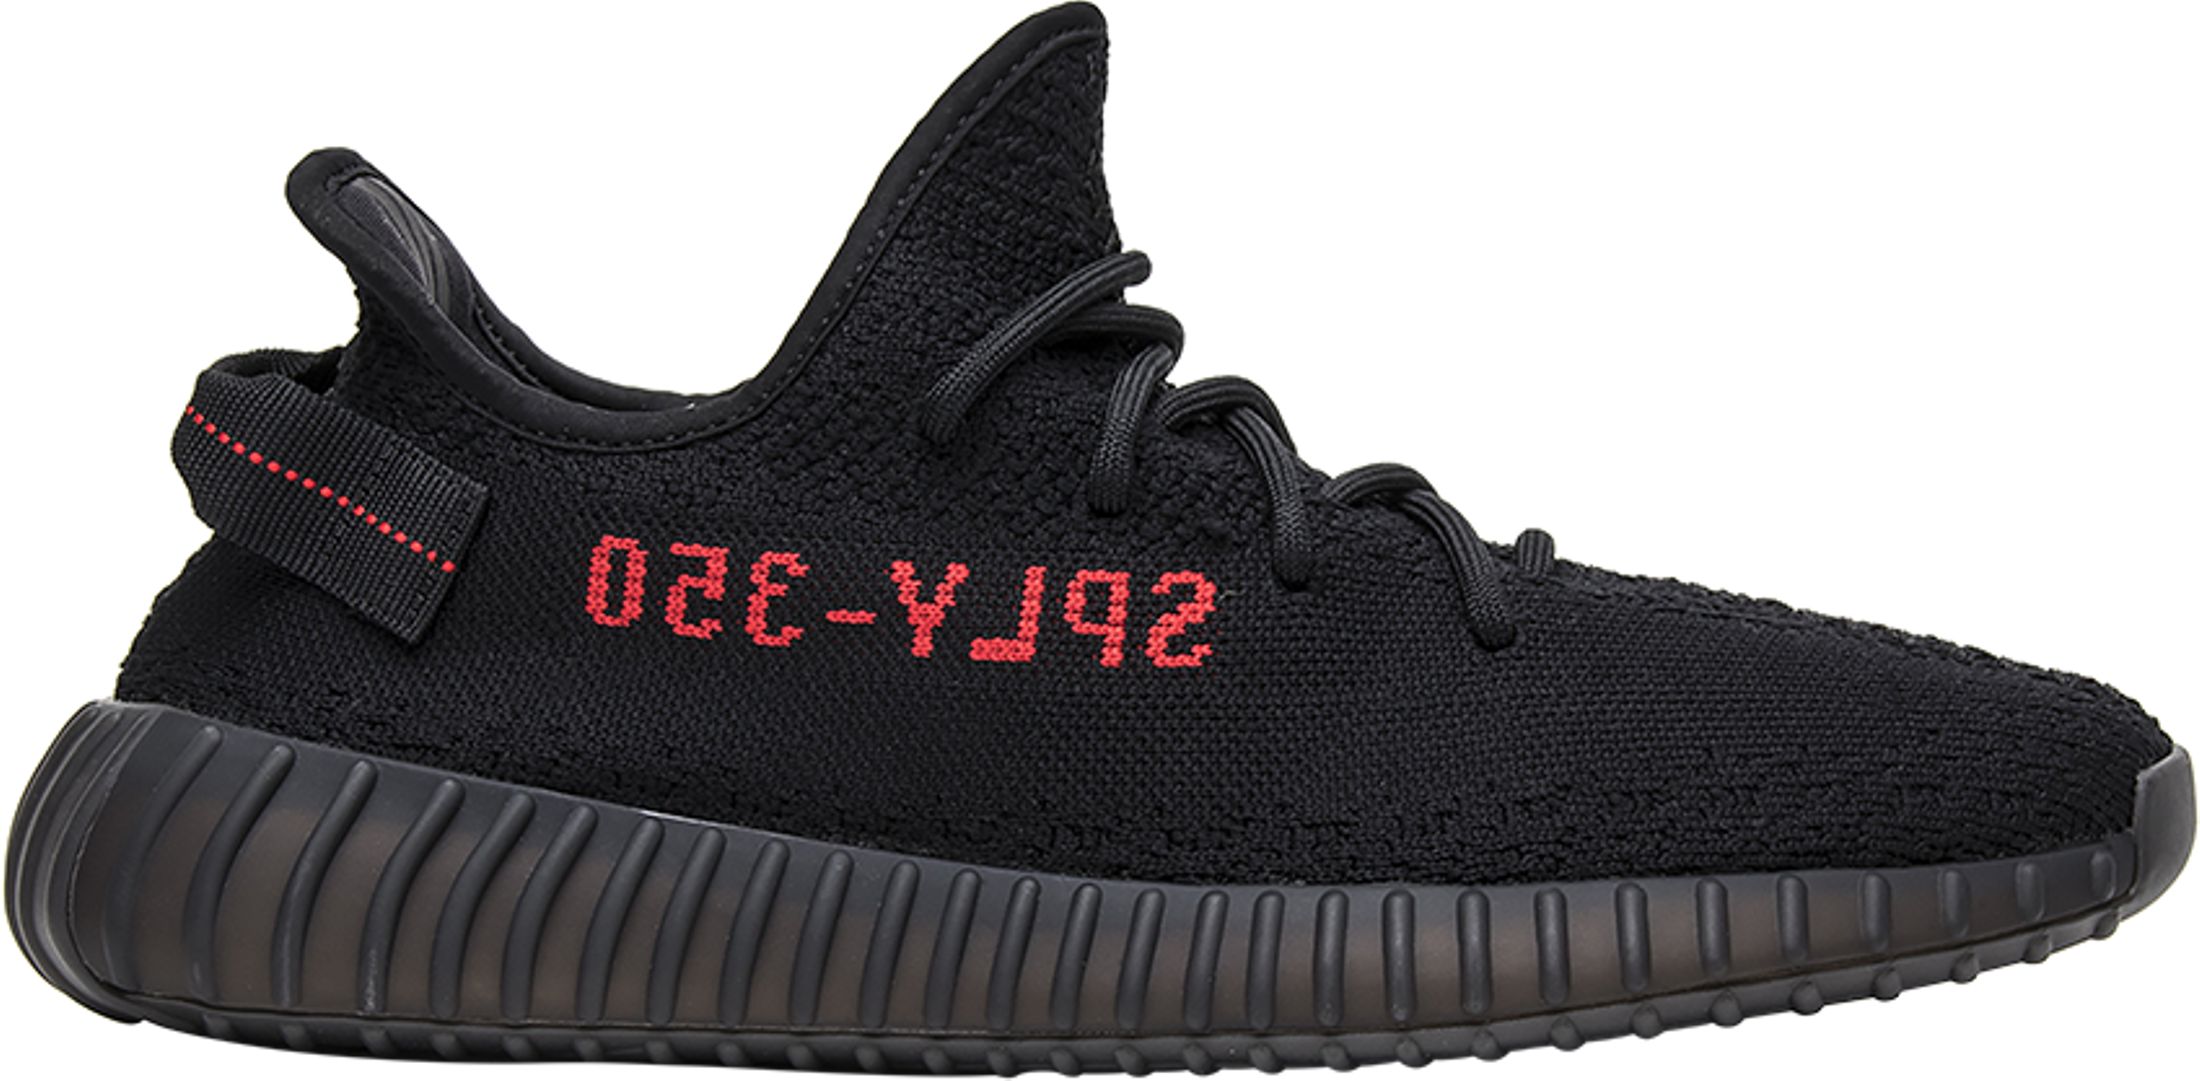 Adidas Yeezy Boost 350 V2 Black Red - Sneakers CP9652